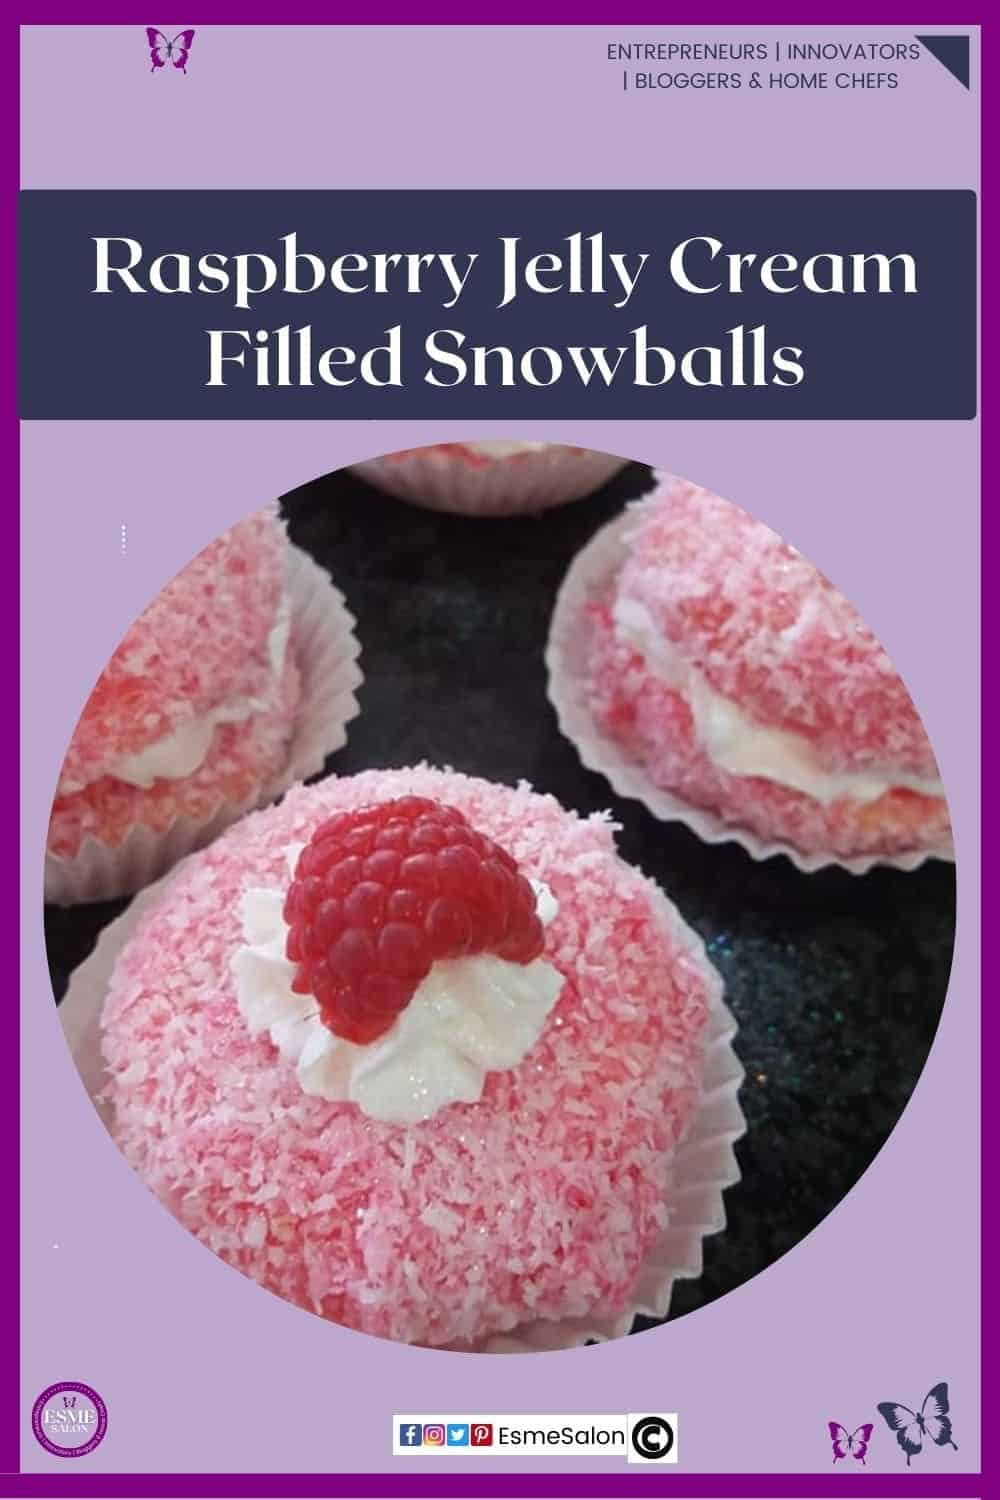 an image of Raspberry Jelly Cream Filled Snowballs